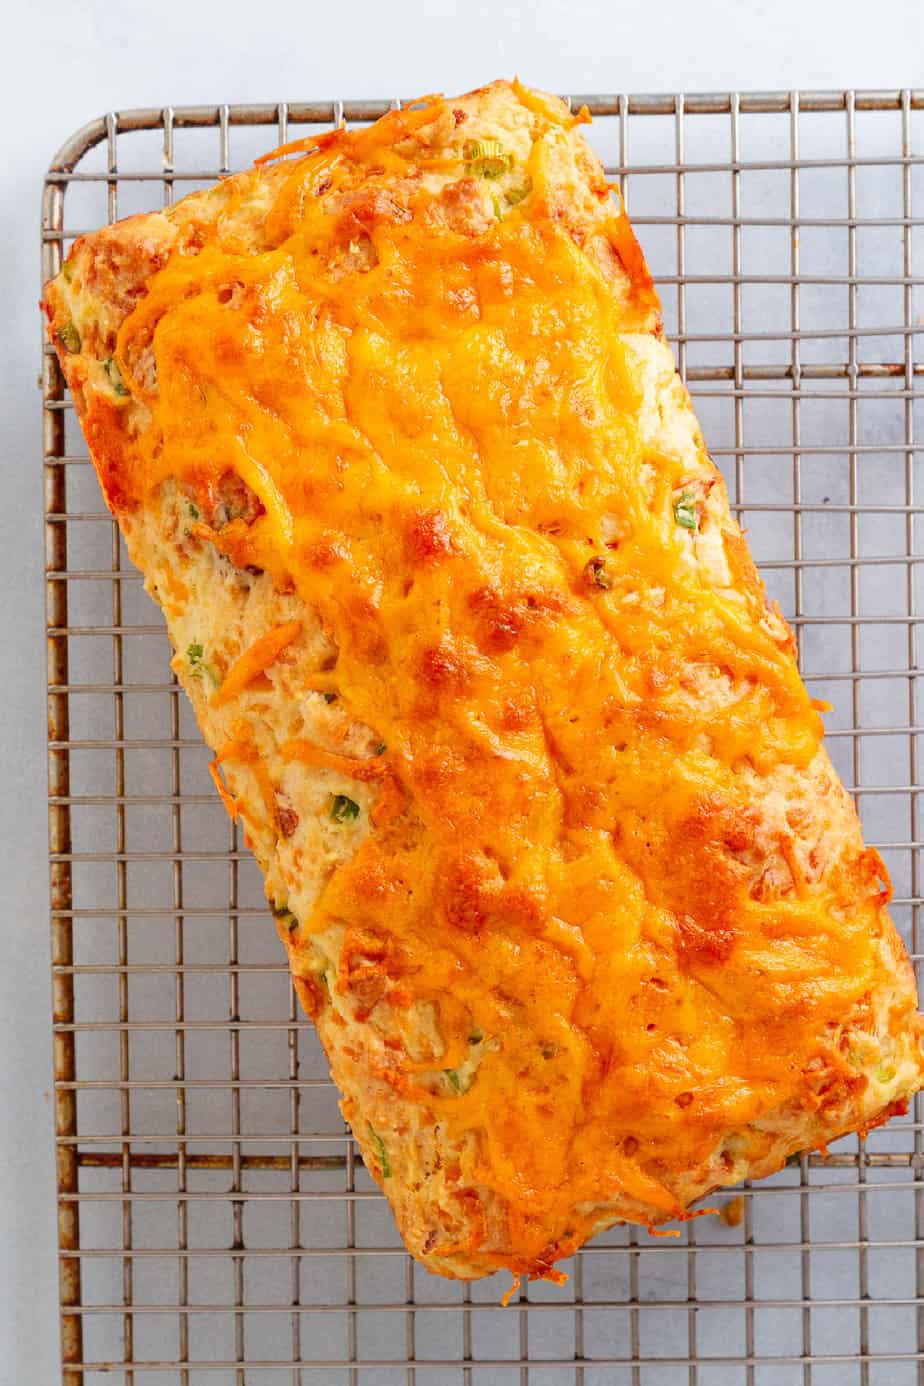 Loaf bread from above with cheese melted over the top resting on a wire rack on the counter.